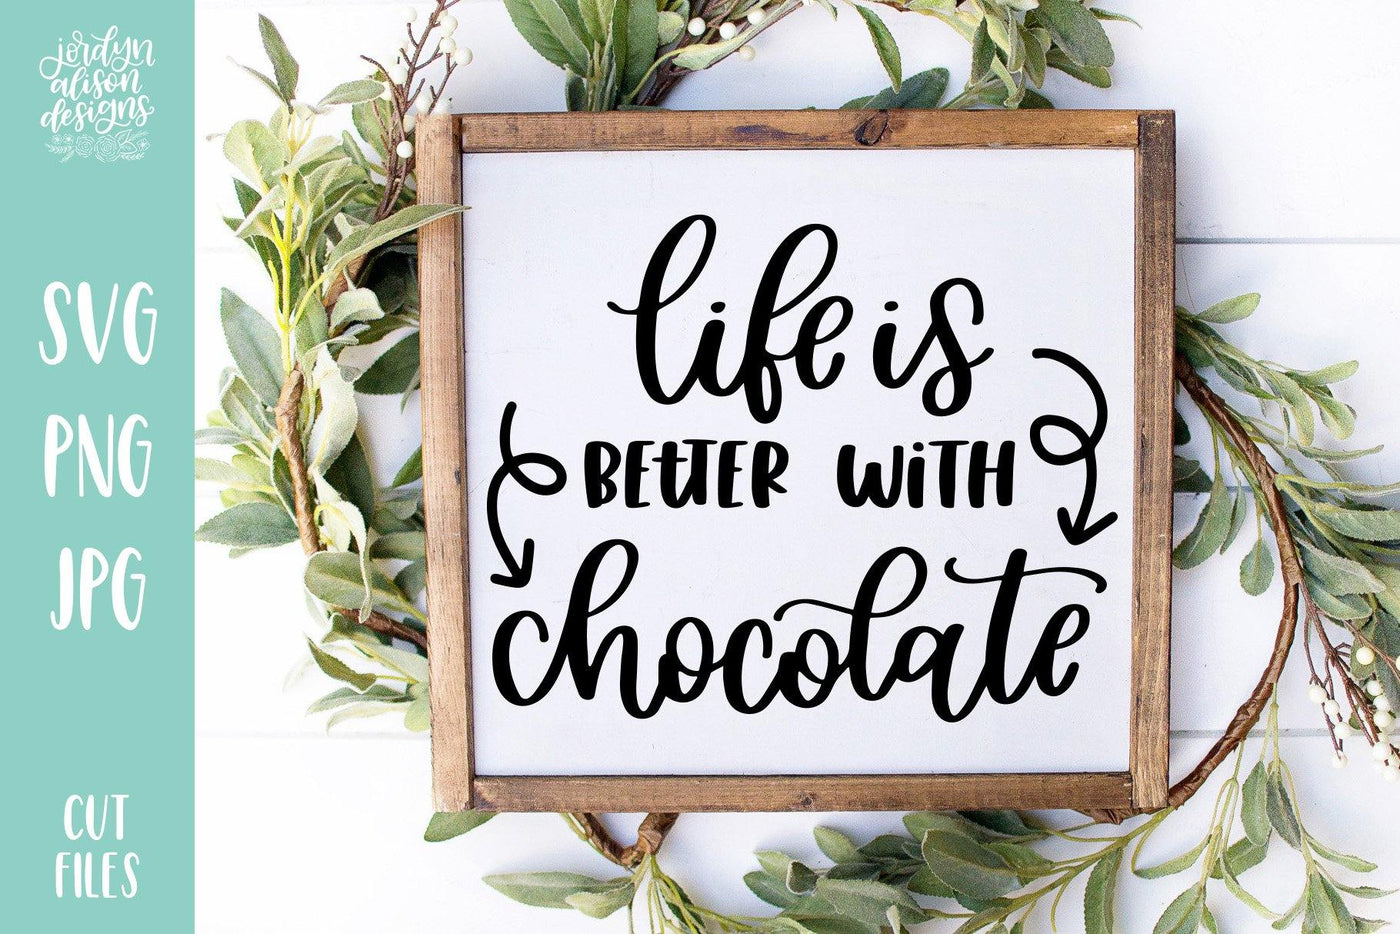 Cut File | Life is Better with Chocolate - JordynAlisonDesigns